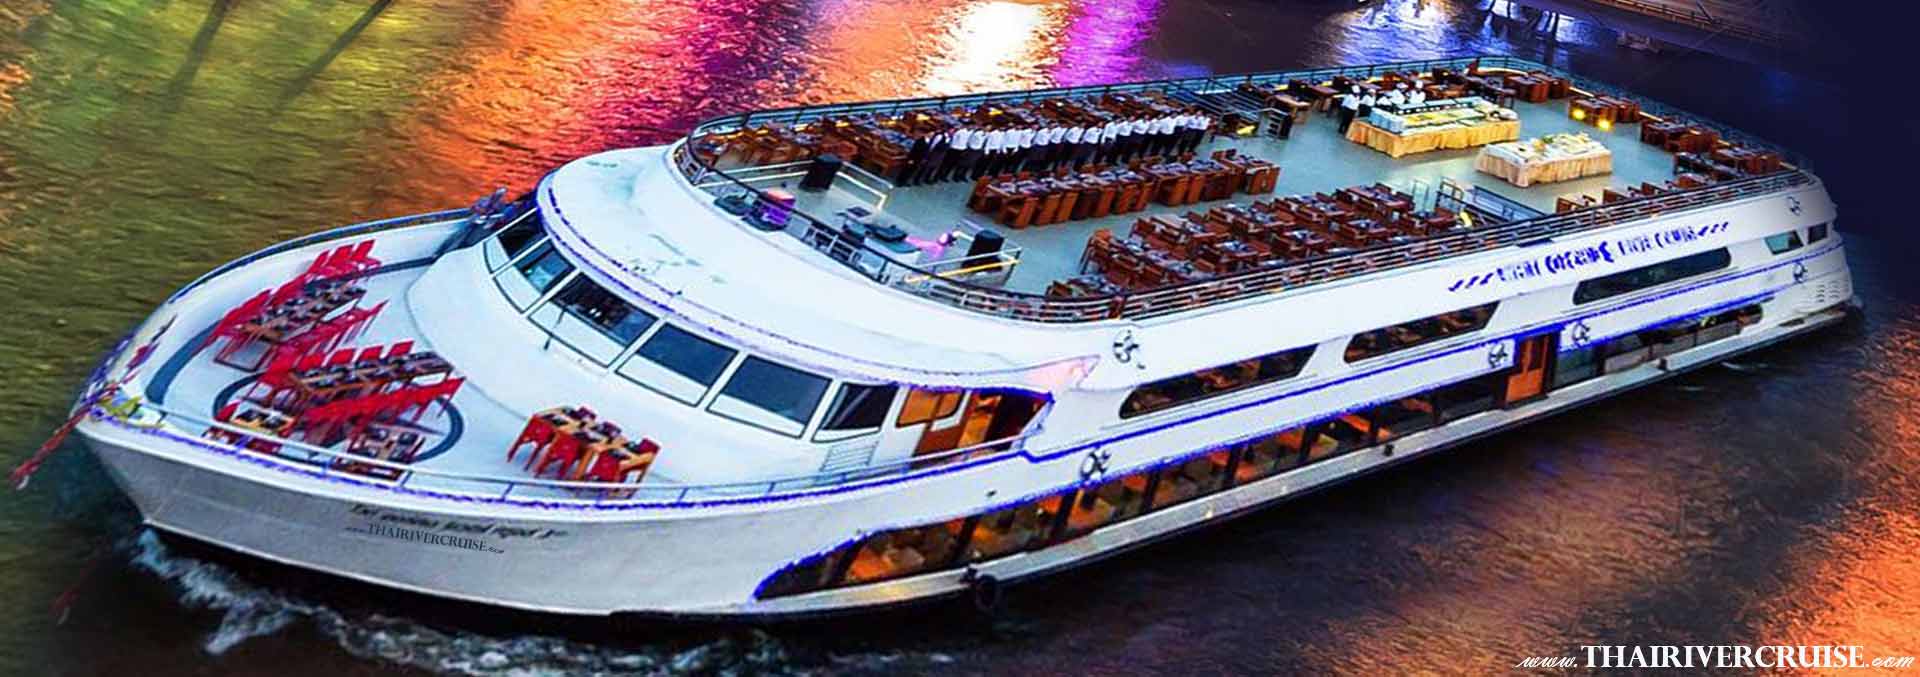 White Orchid River Cruise Bangkok Dinner Cruise Cheap Price Tickets Offer Now